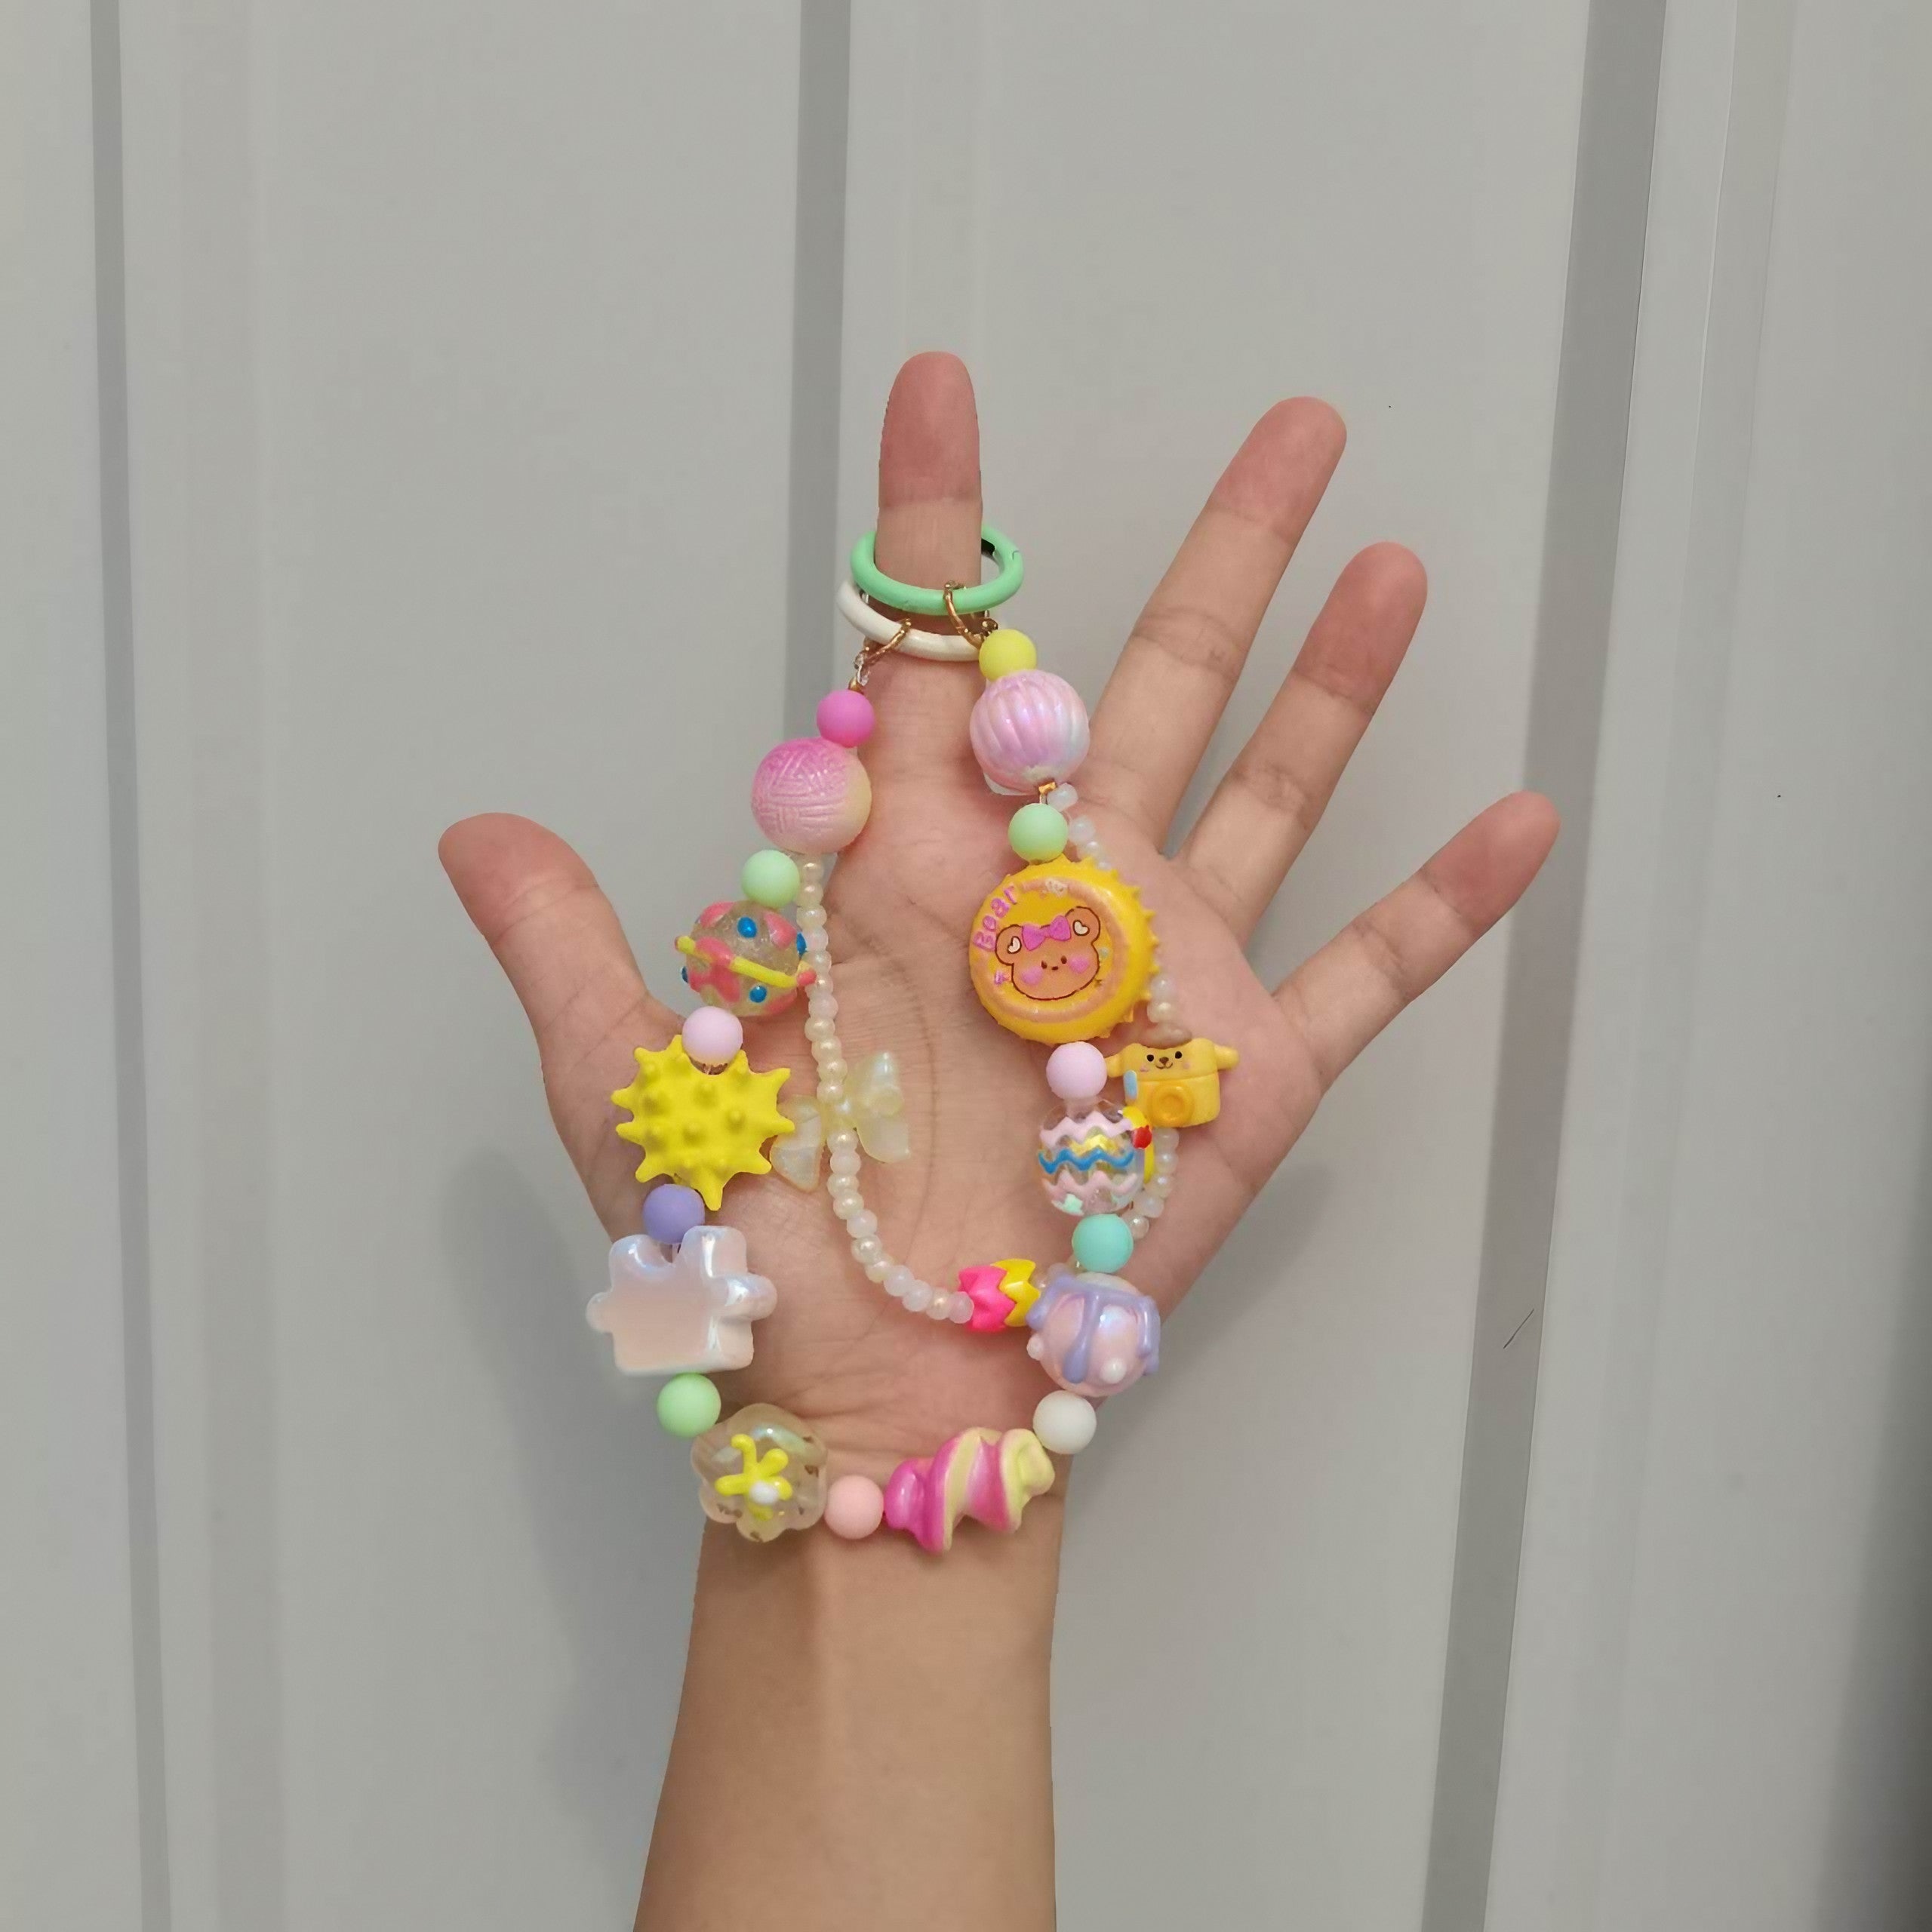 A hand showcasing a versatile fashion chain with pastel-colored beads for Y2K style accessories